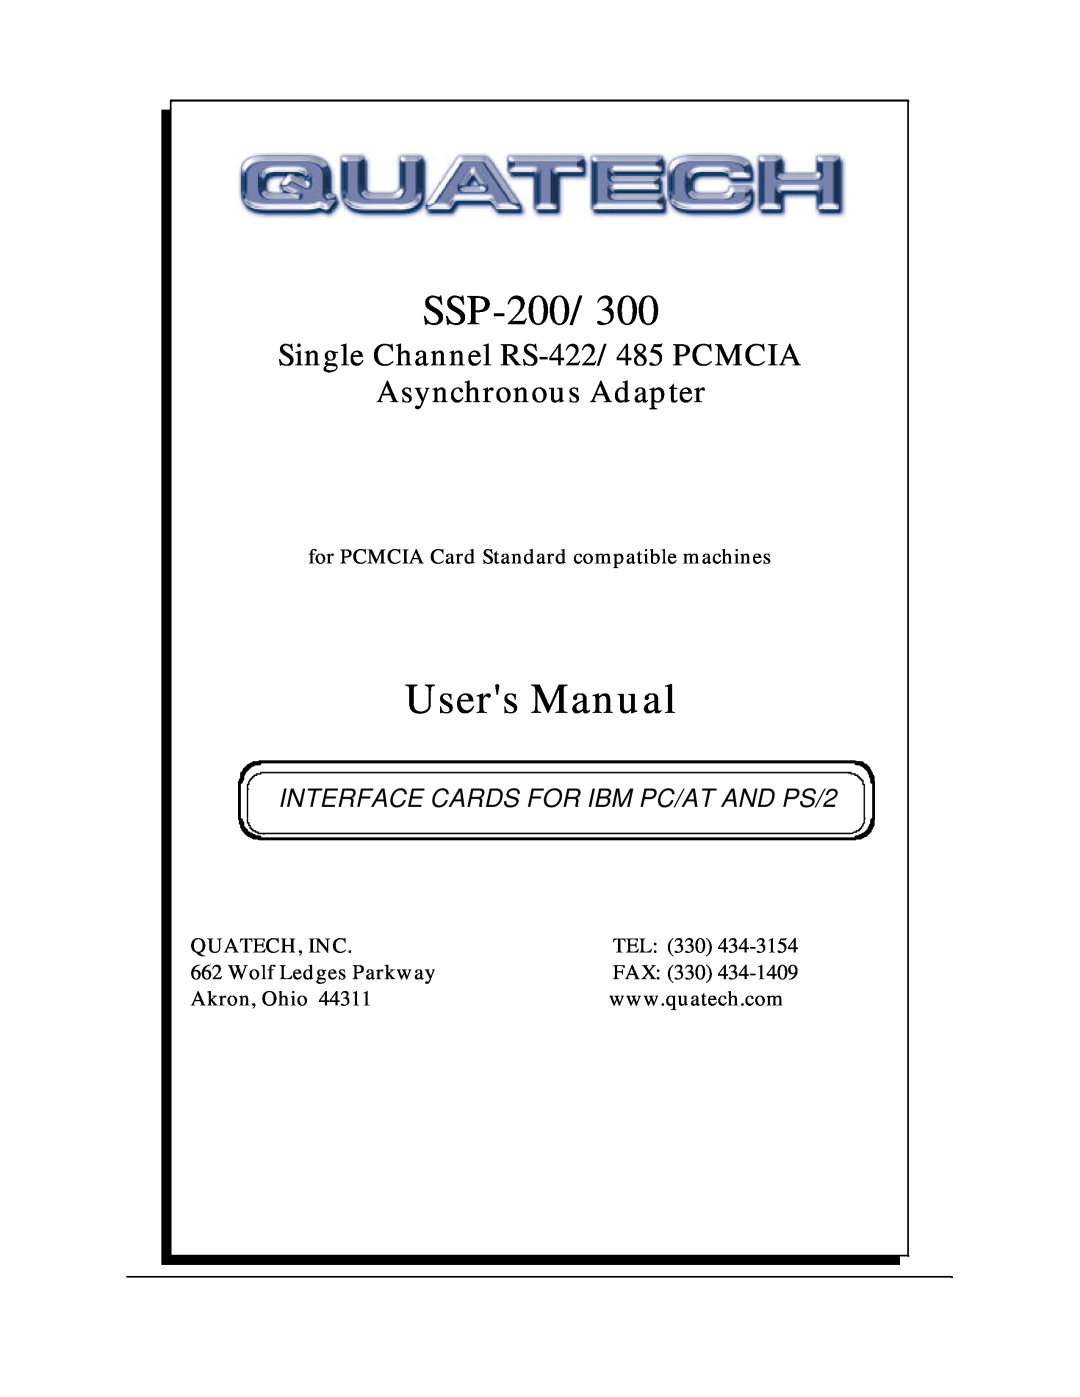 Quatech SSP-300 user manual SSP-200/300, Users Manual, Single Channel RS-422/485 PCMCIA Asynchronous Adapter 